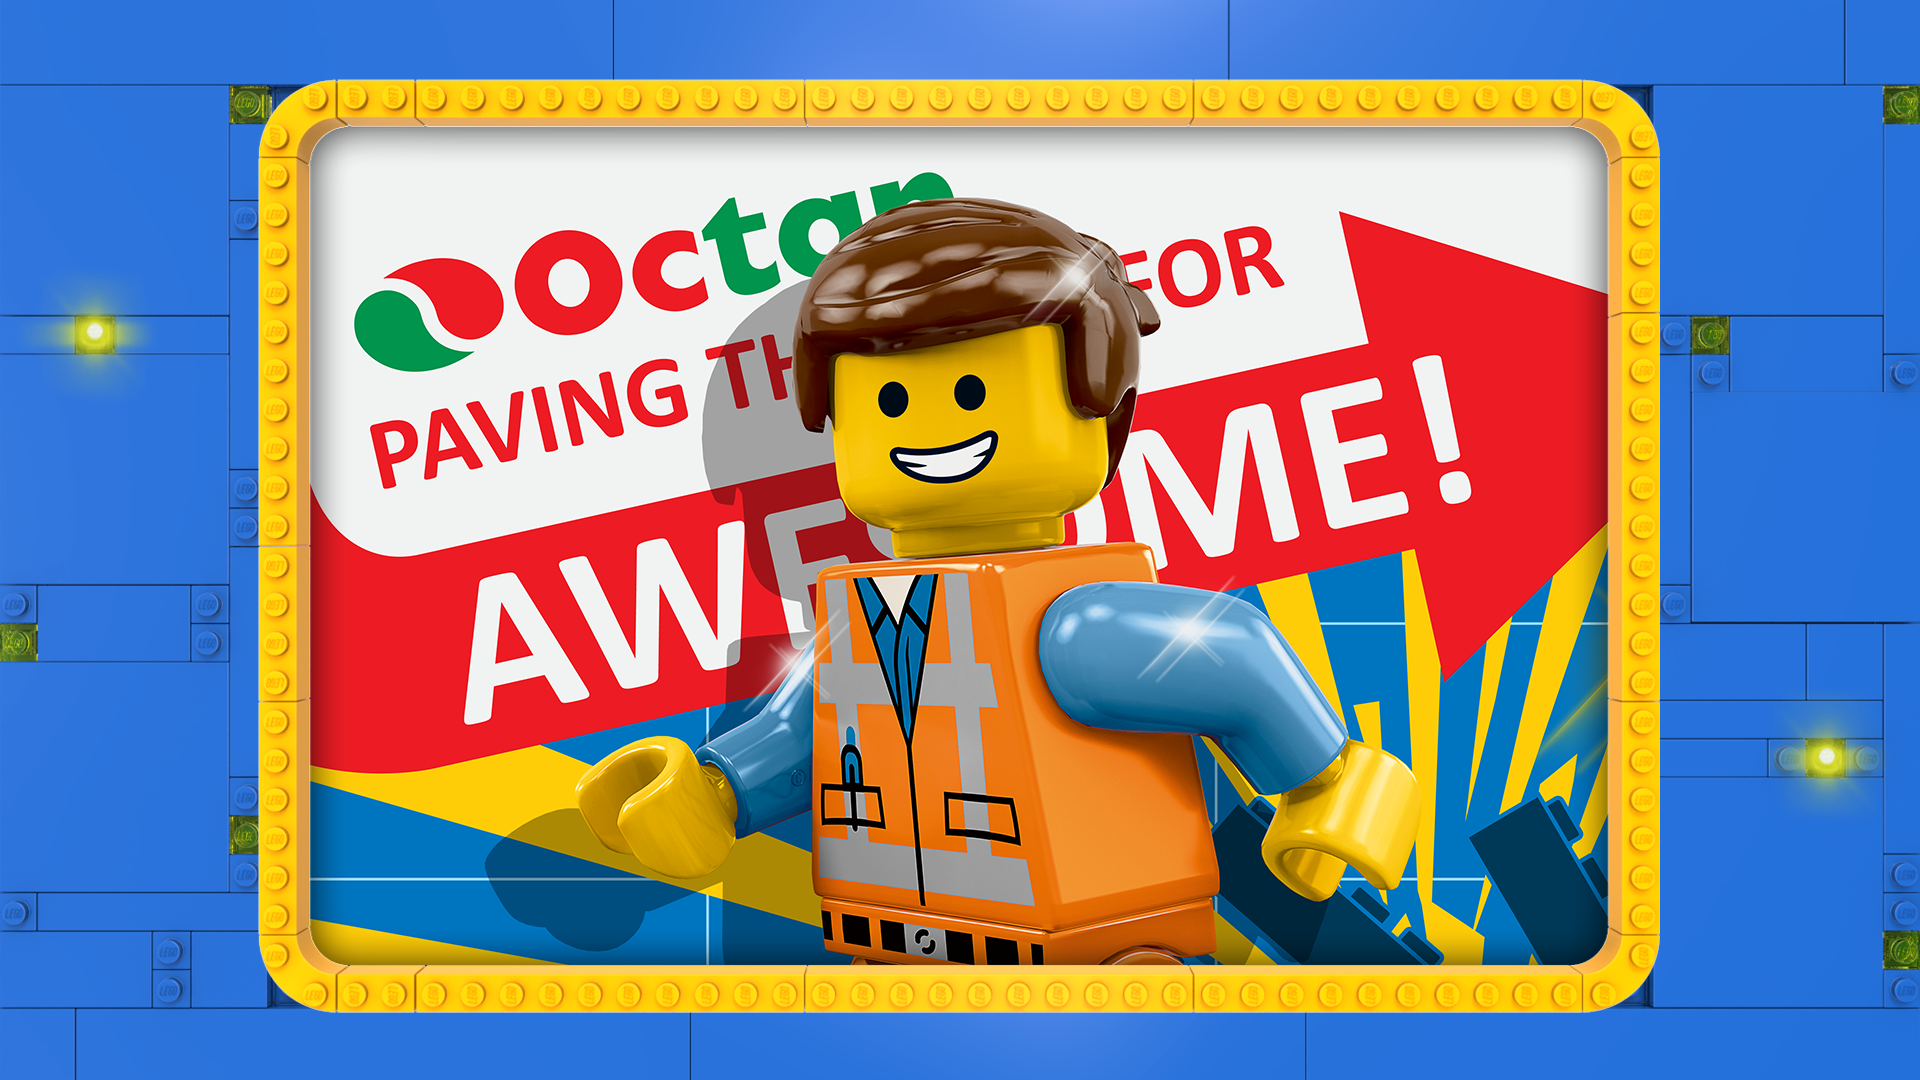 Icon for Everything Is Awesome!